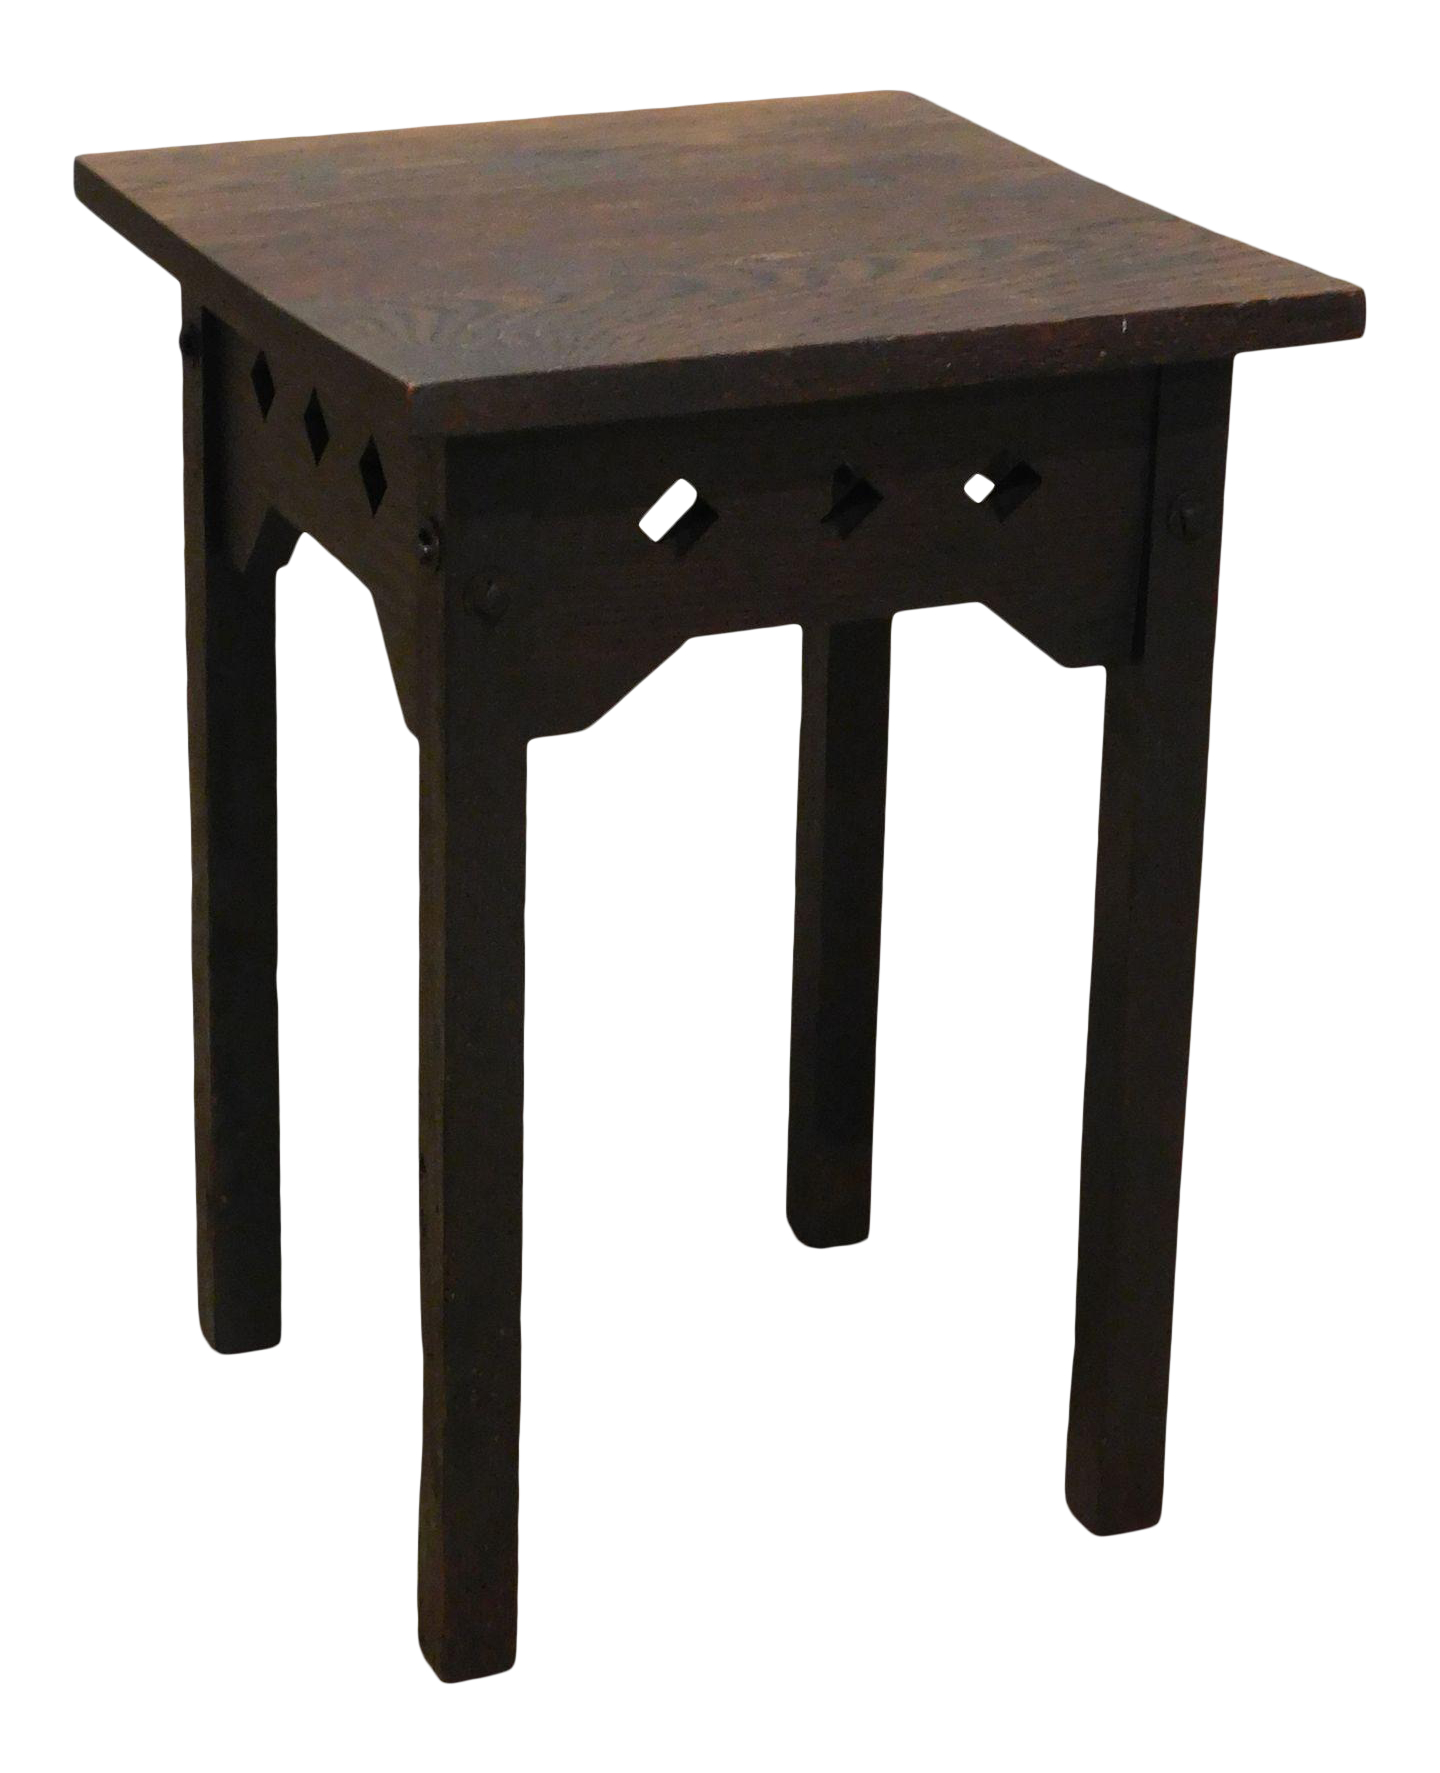 Taboret Stool PNG Image File